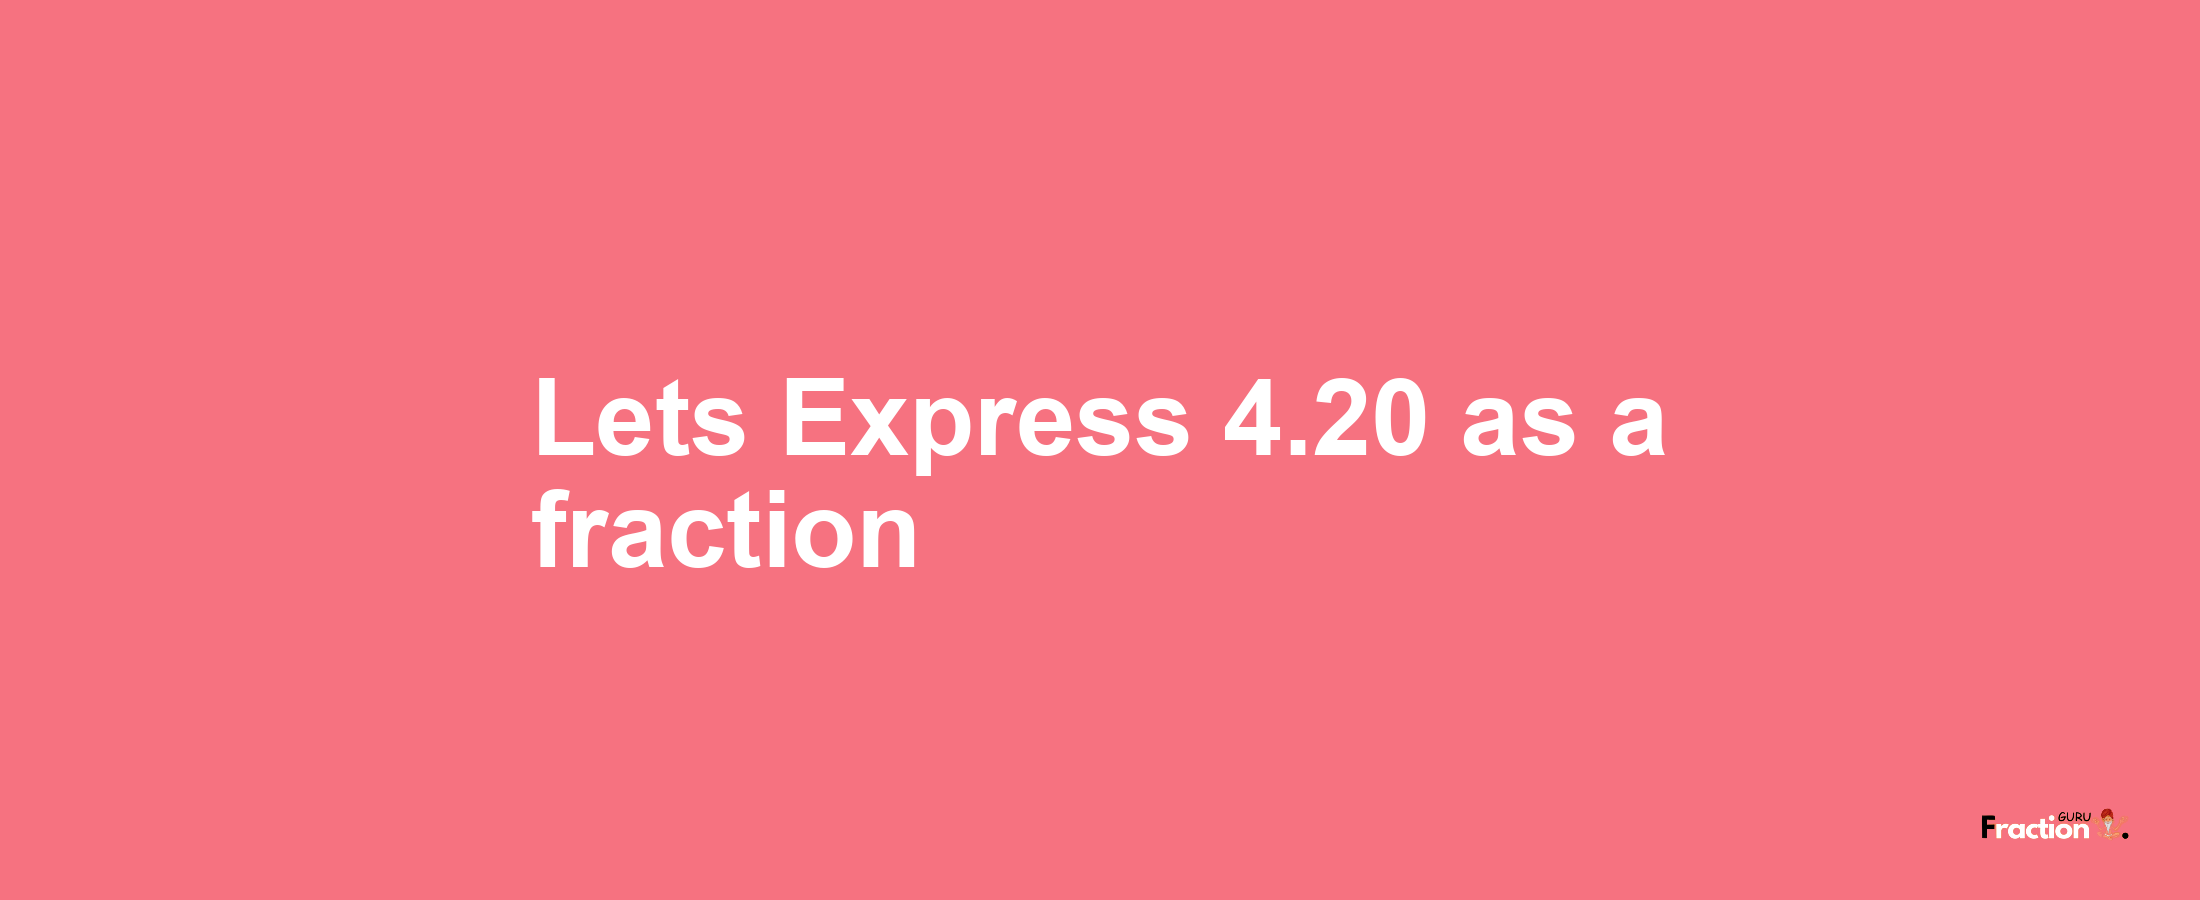 Lets Express 4.20 as afraction